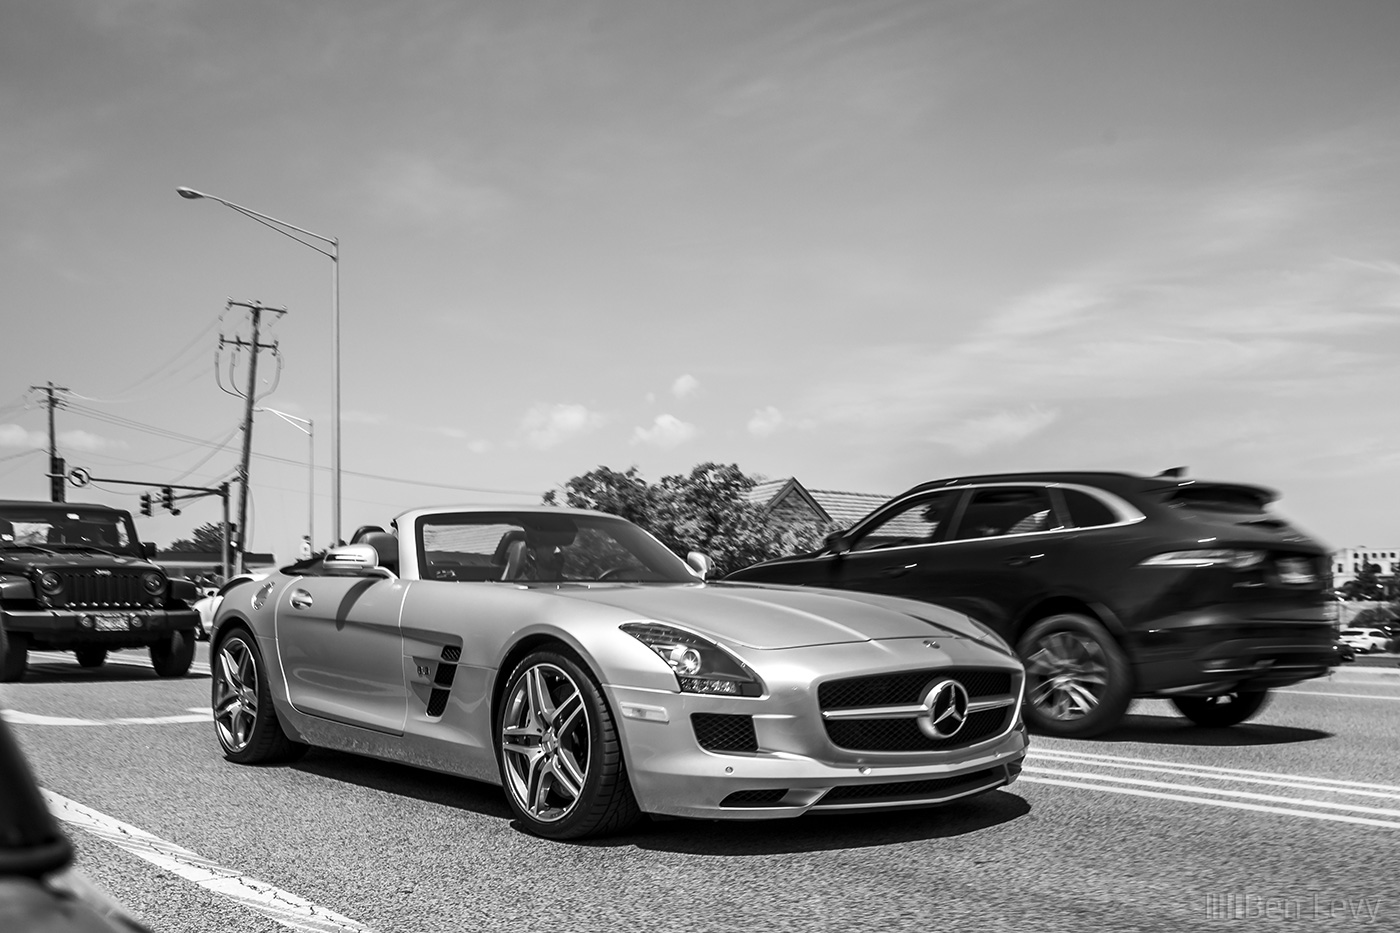 Silver Mercedes-Benz SLS AMG Roadster on the Road